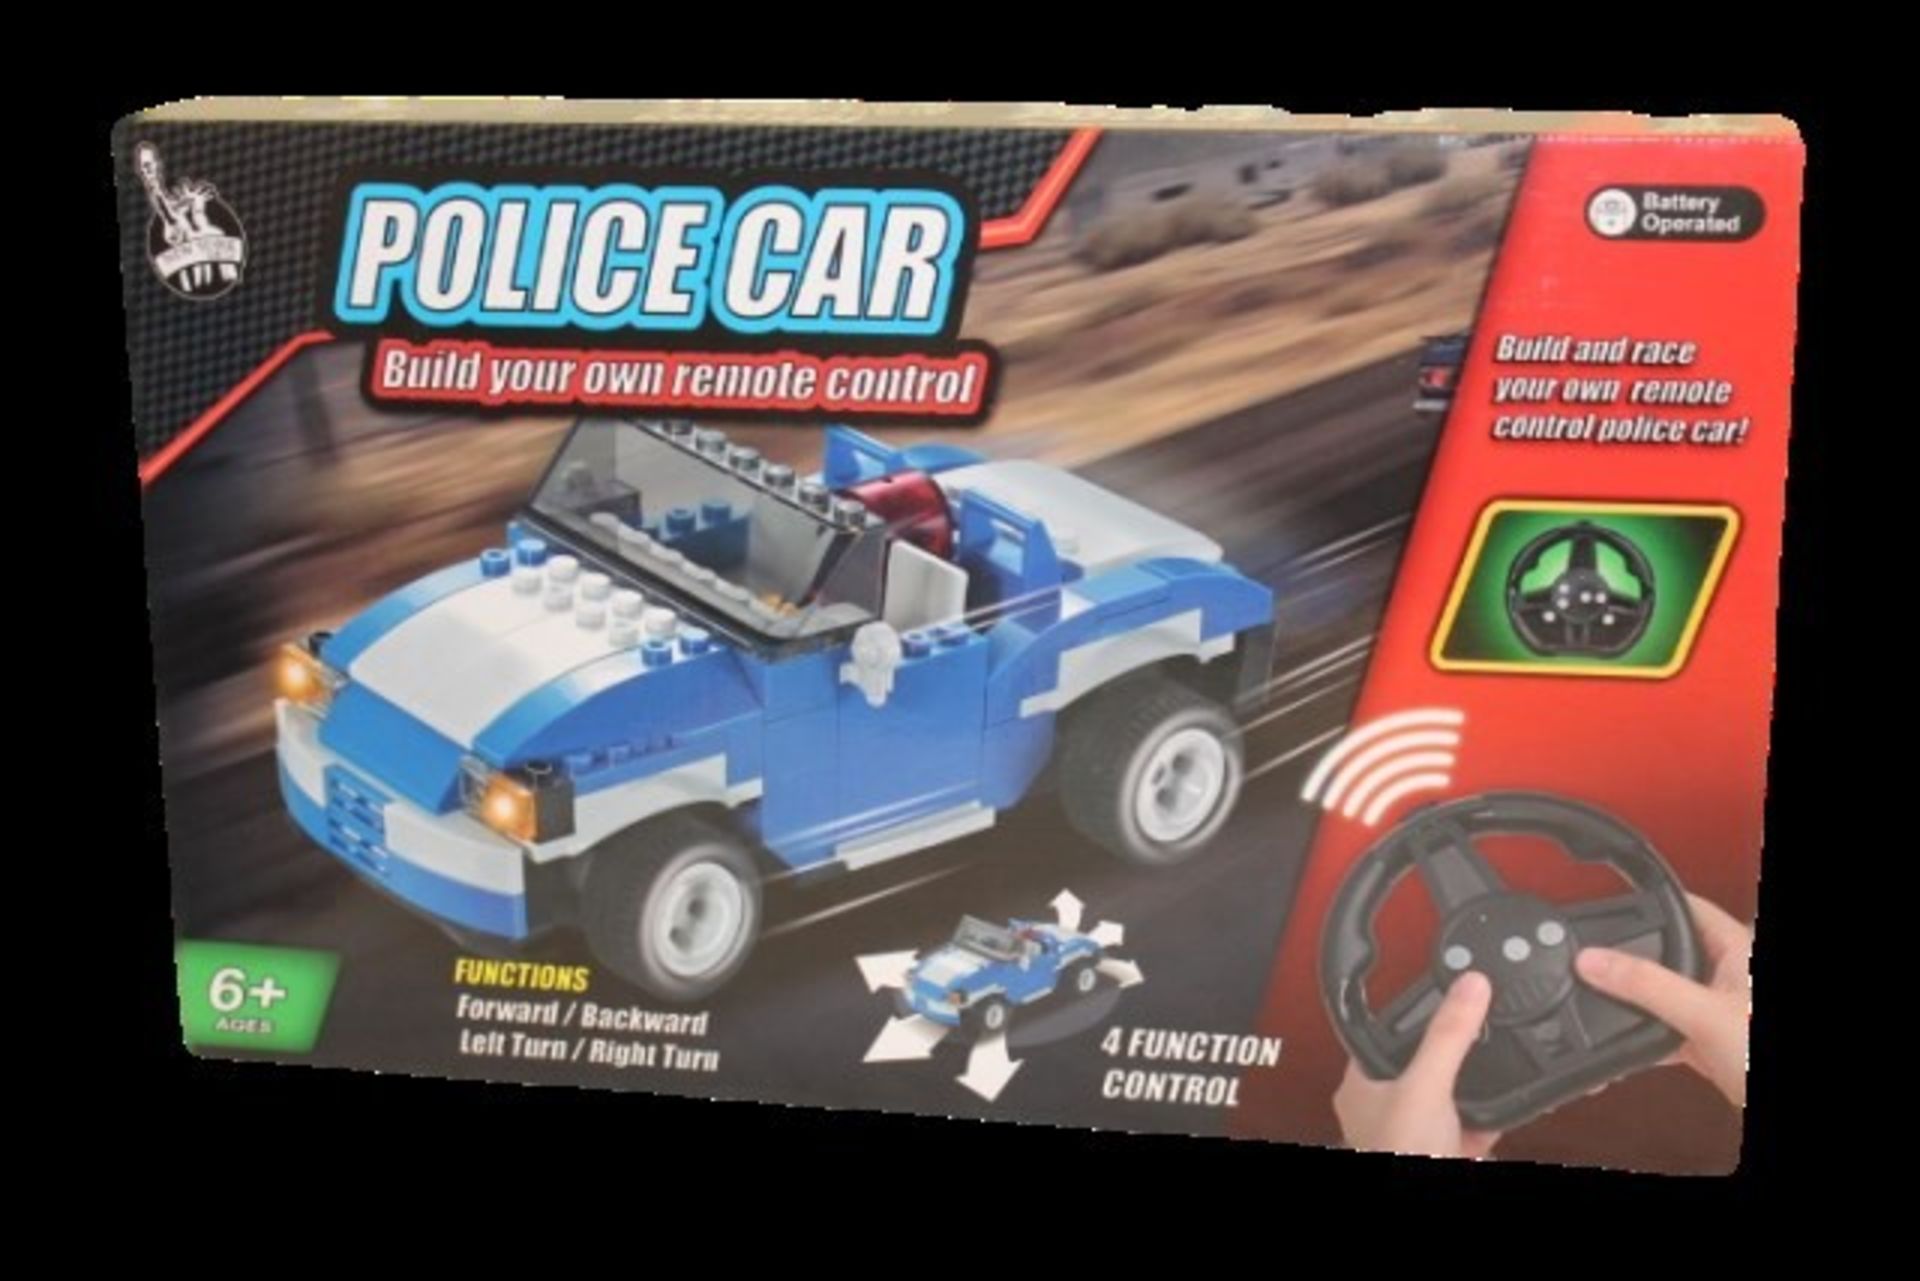 V Brand New Radio Controlled Build your own Police Car Full function r/c Matches Lego RRP ú49.99